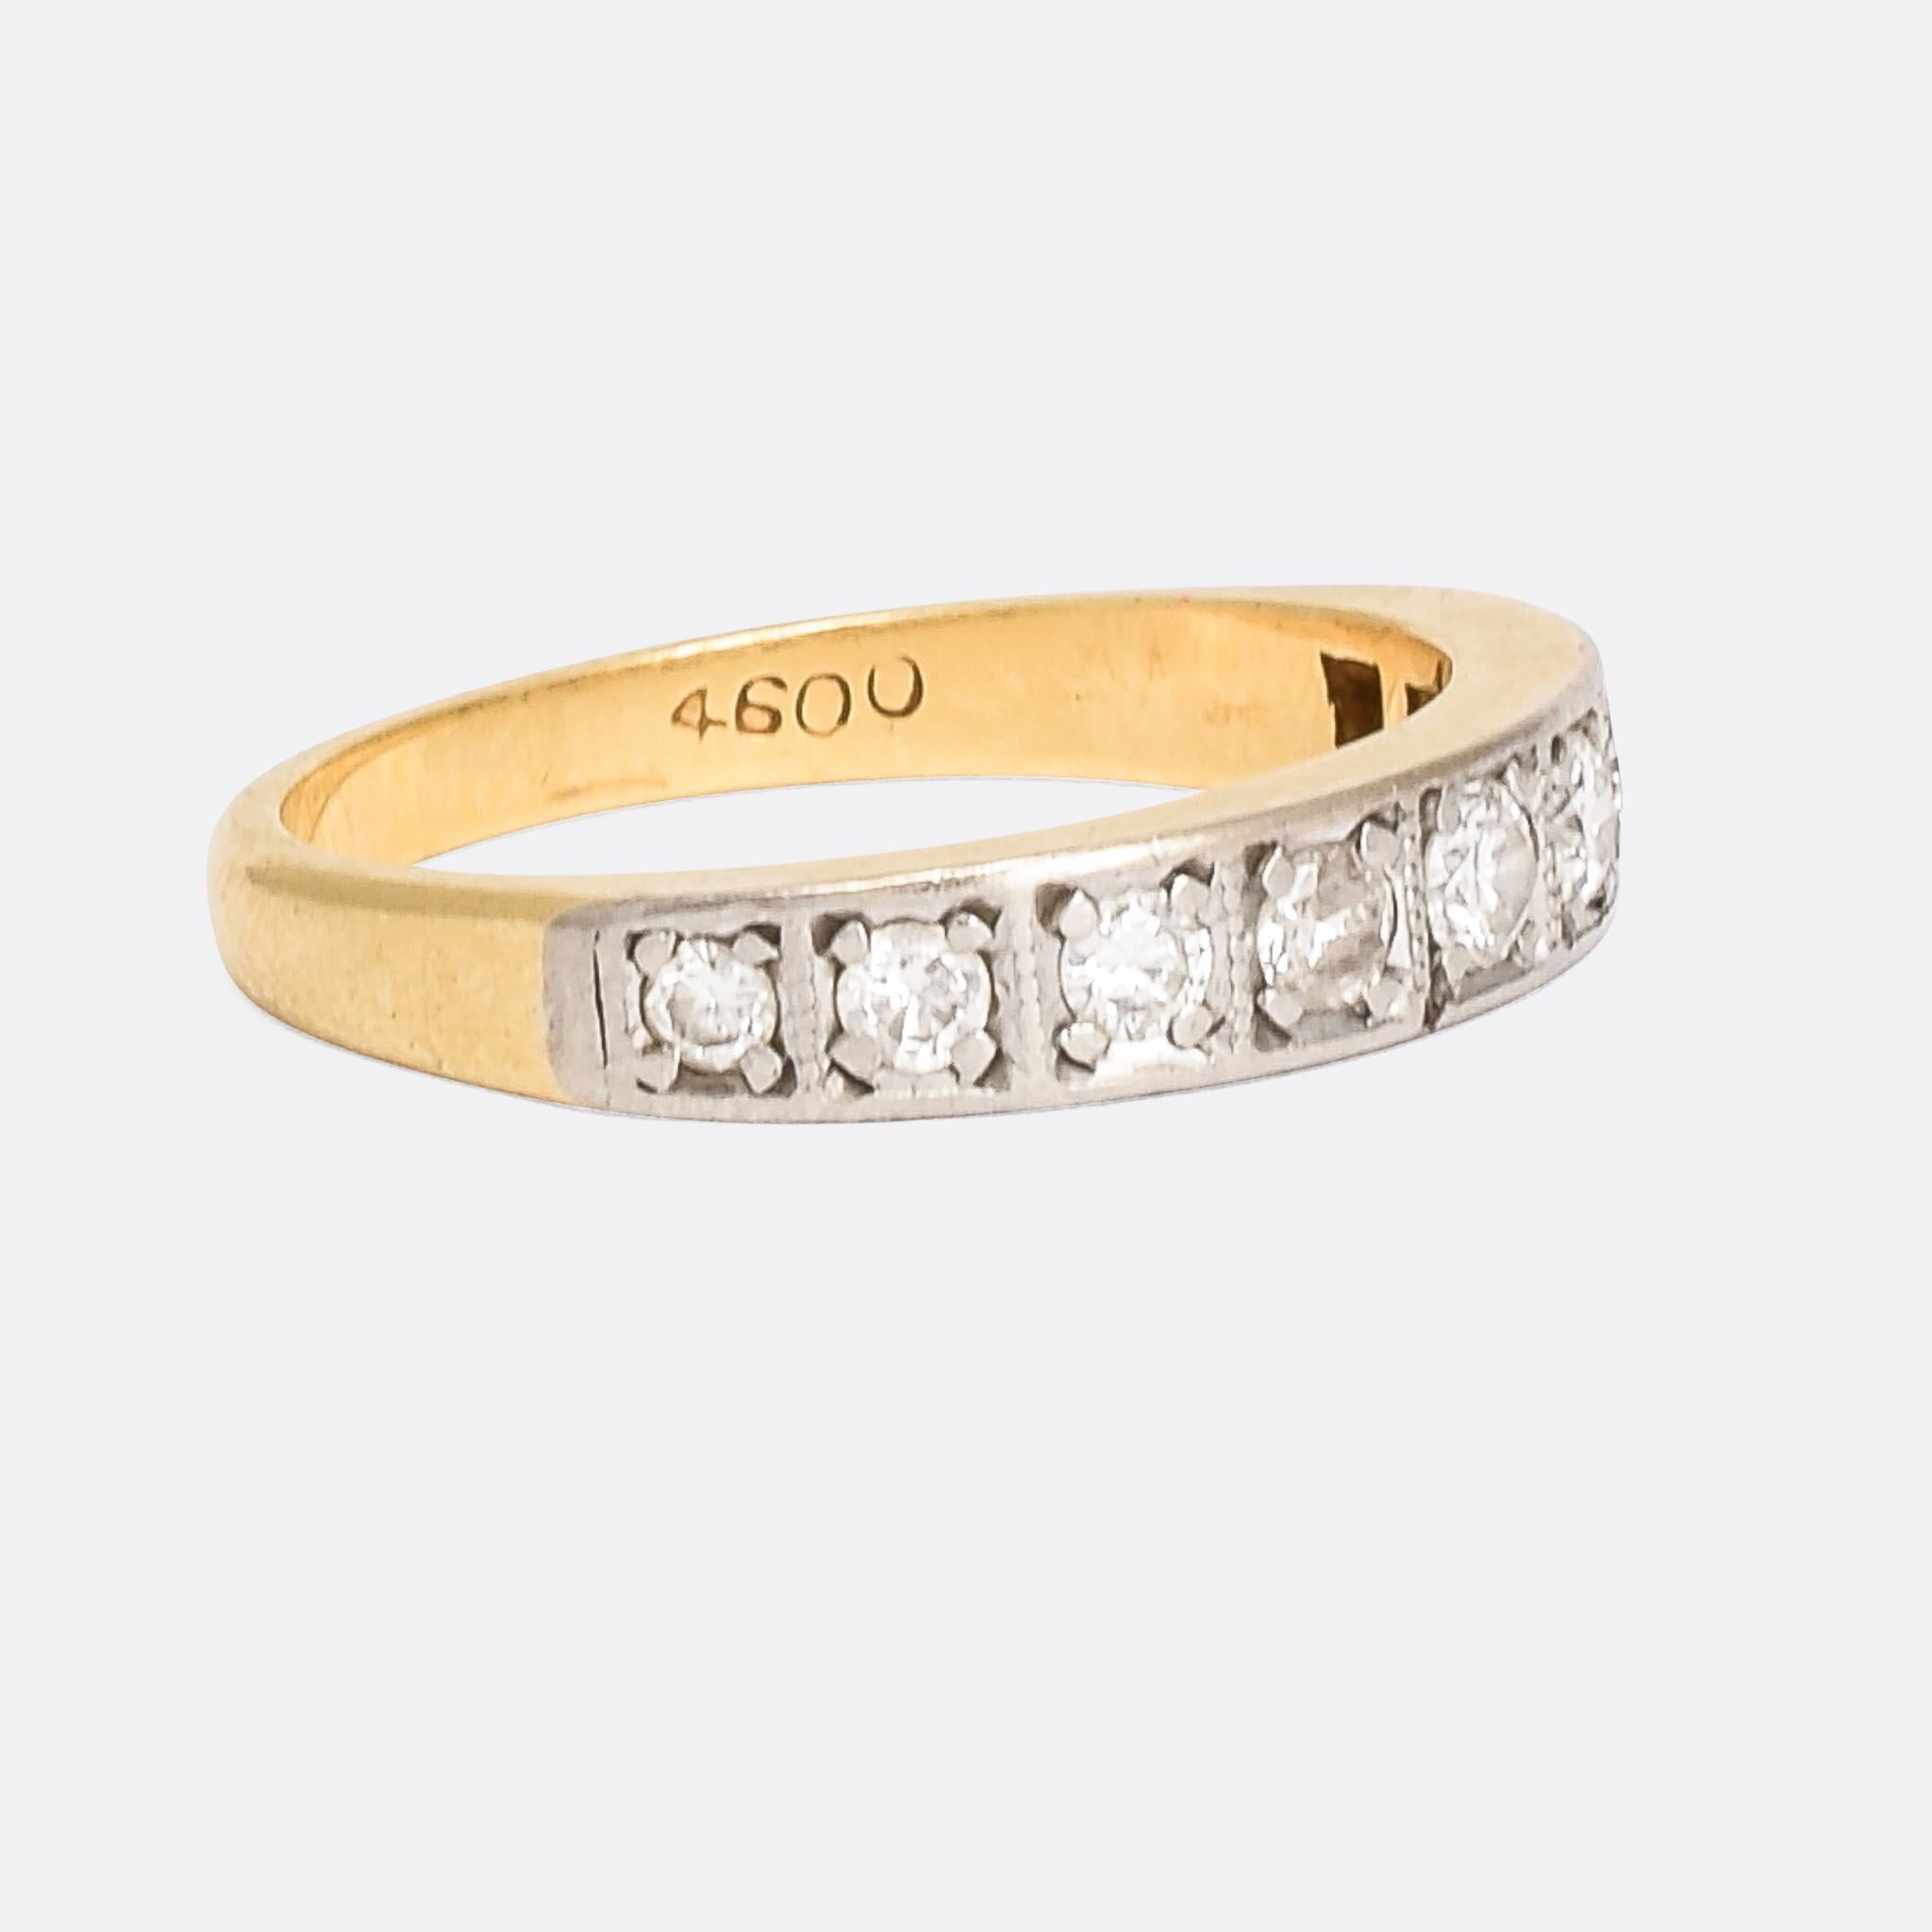 An Art Deco era half eternity ring dating from 1930s England, and set with just under half a carat of graduated brilliant cut diamonds. The stones rest in individual square platinum mounts, decorated with a hint of millegrain and tapering down